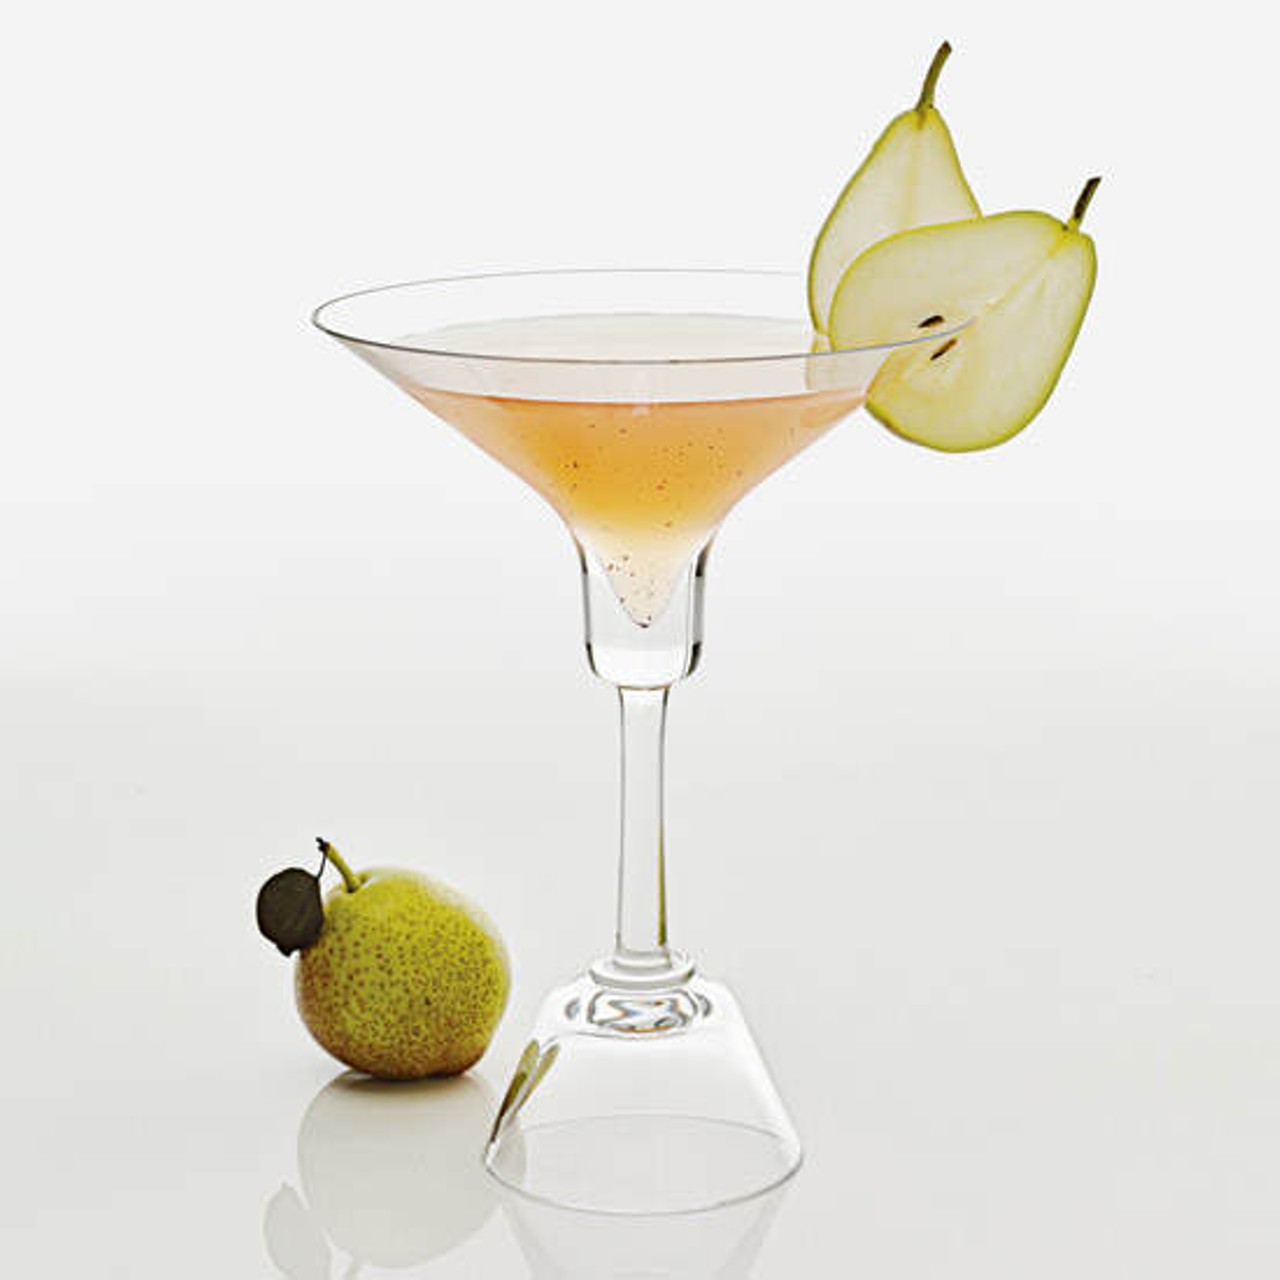 Pear of Desire was named with this quote in mind: "The savage man eats out of necessity; the civilized man eats out of desire." Don’t be a savage this Christmas and drink some damn pears. Find the recipe at Food and Wine.